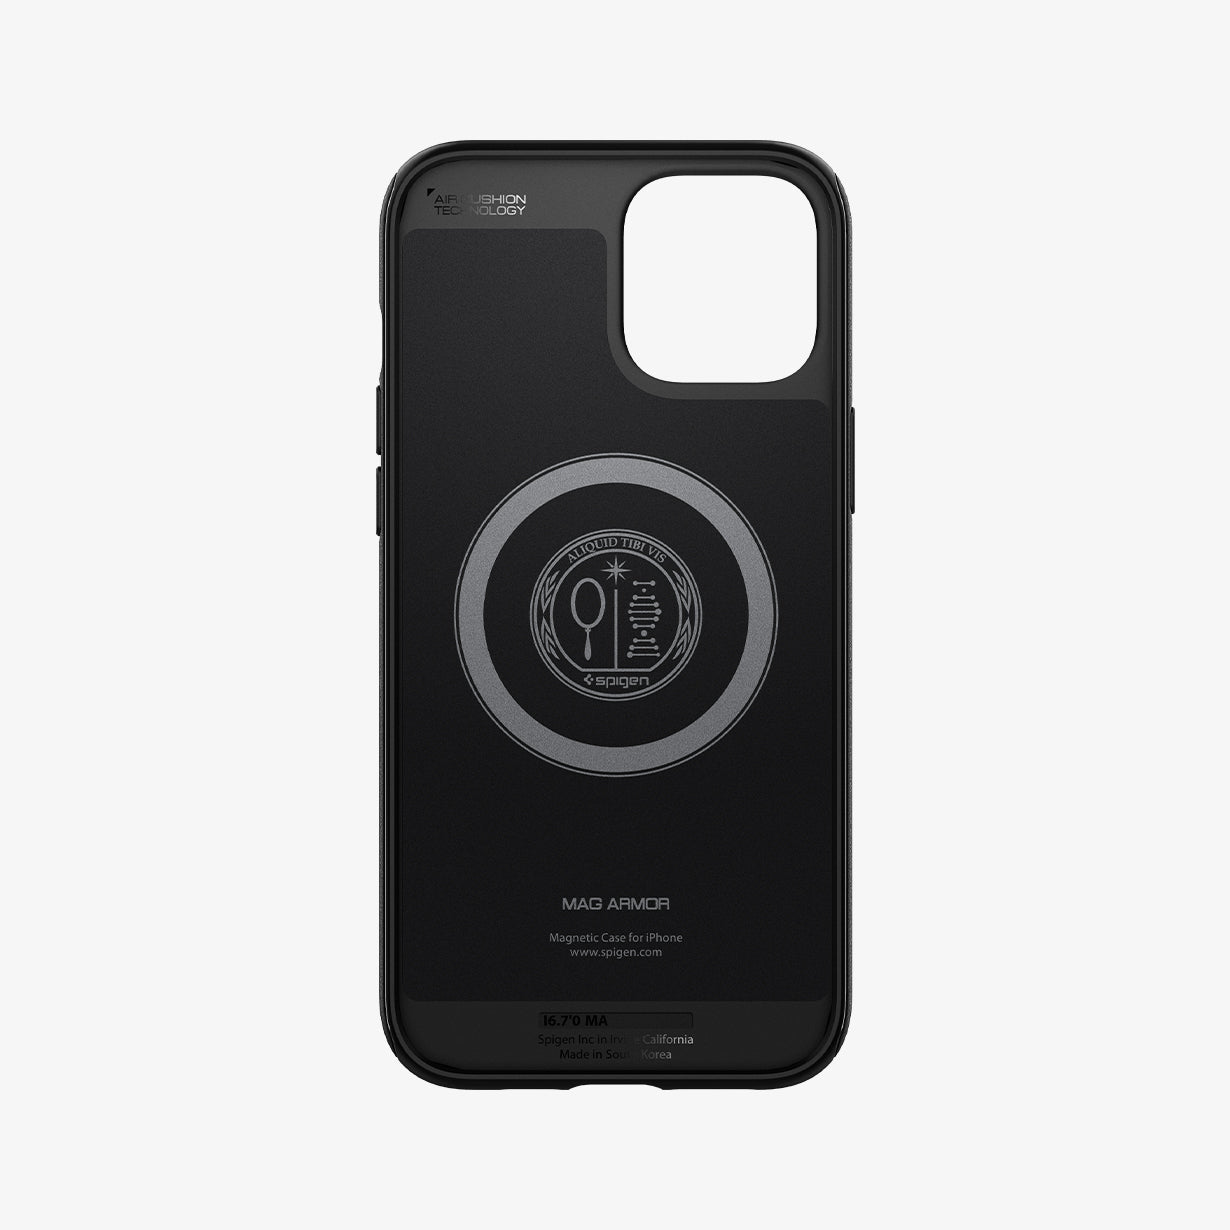 ACS01864 - iPhone 12 Pro Max Case MagArmor in black showing the inside of case